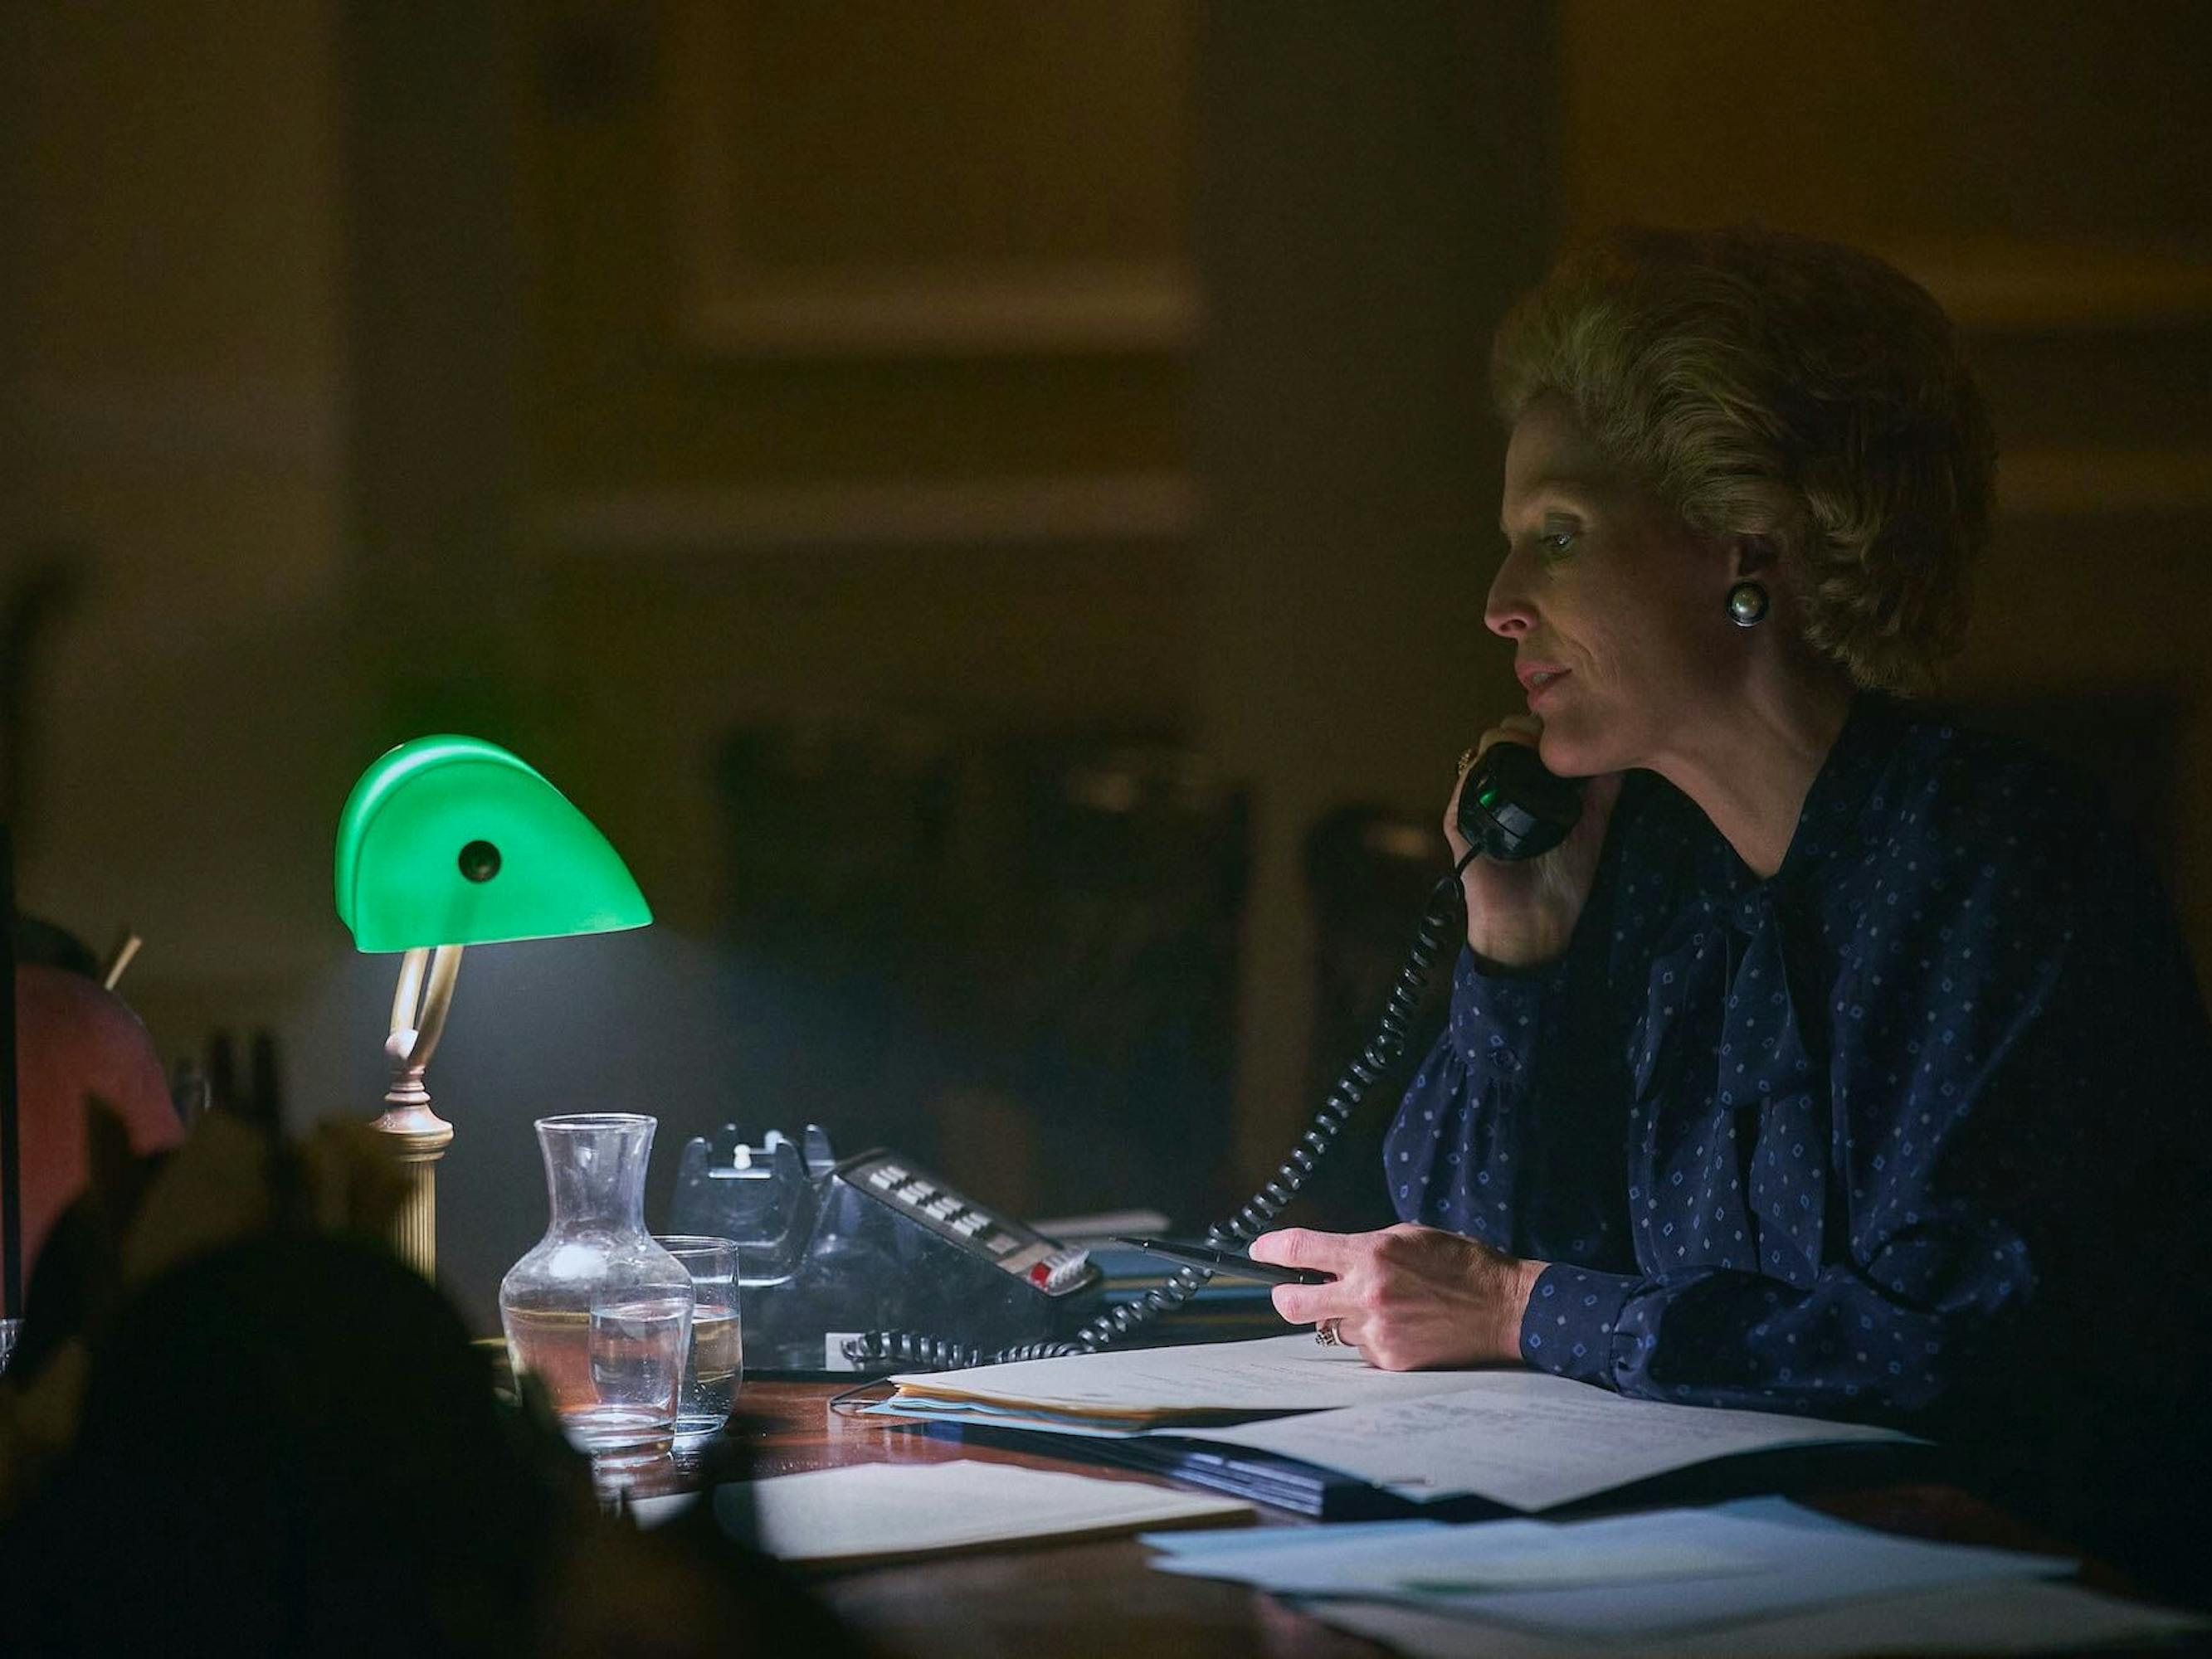 Margaret Thatcher (Gillian Anderson) talks to someone on the phone. She sits at a desk covered in papers, a bottle of water, and a green lamp. She wears a navy blouse.